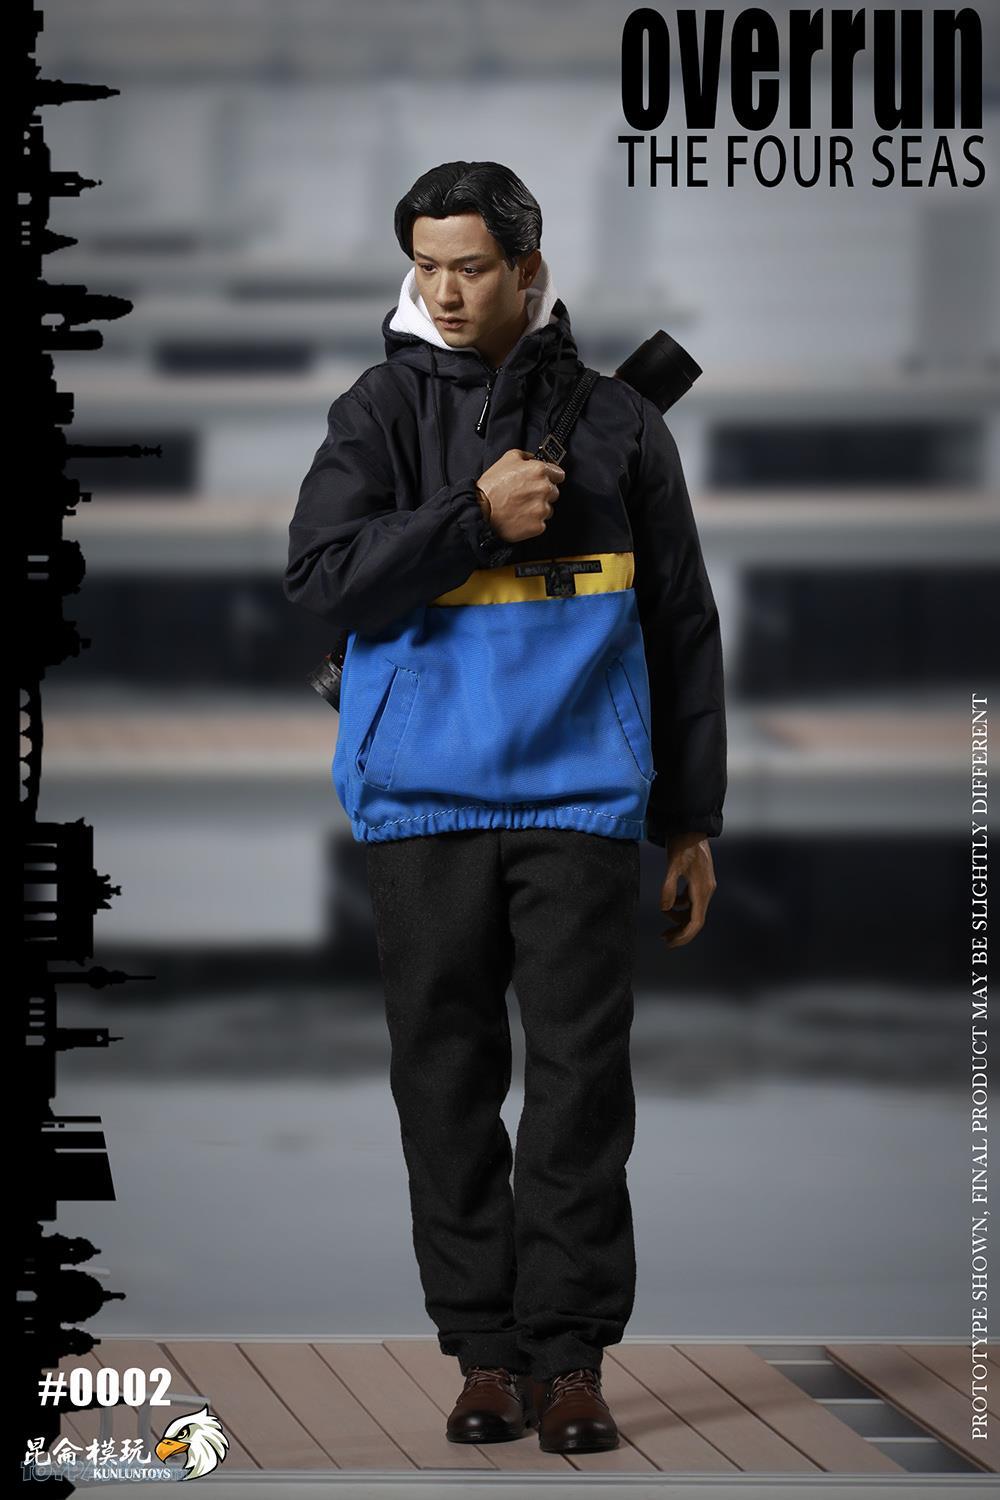 asian - NEW PRODUCT: 1/6th scale Overrun The Four Seas Action Figure  From KunLunToys  Code: KLT10002 33120113